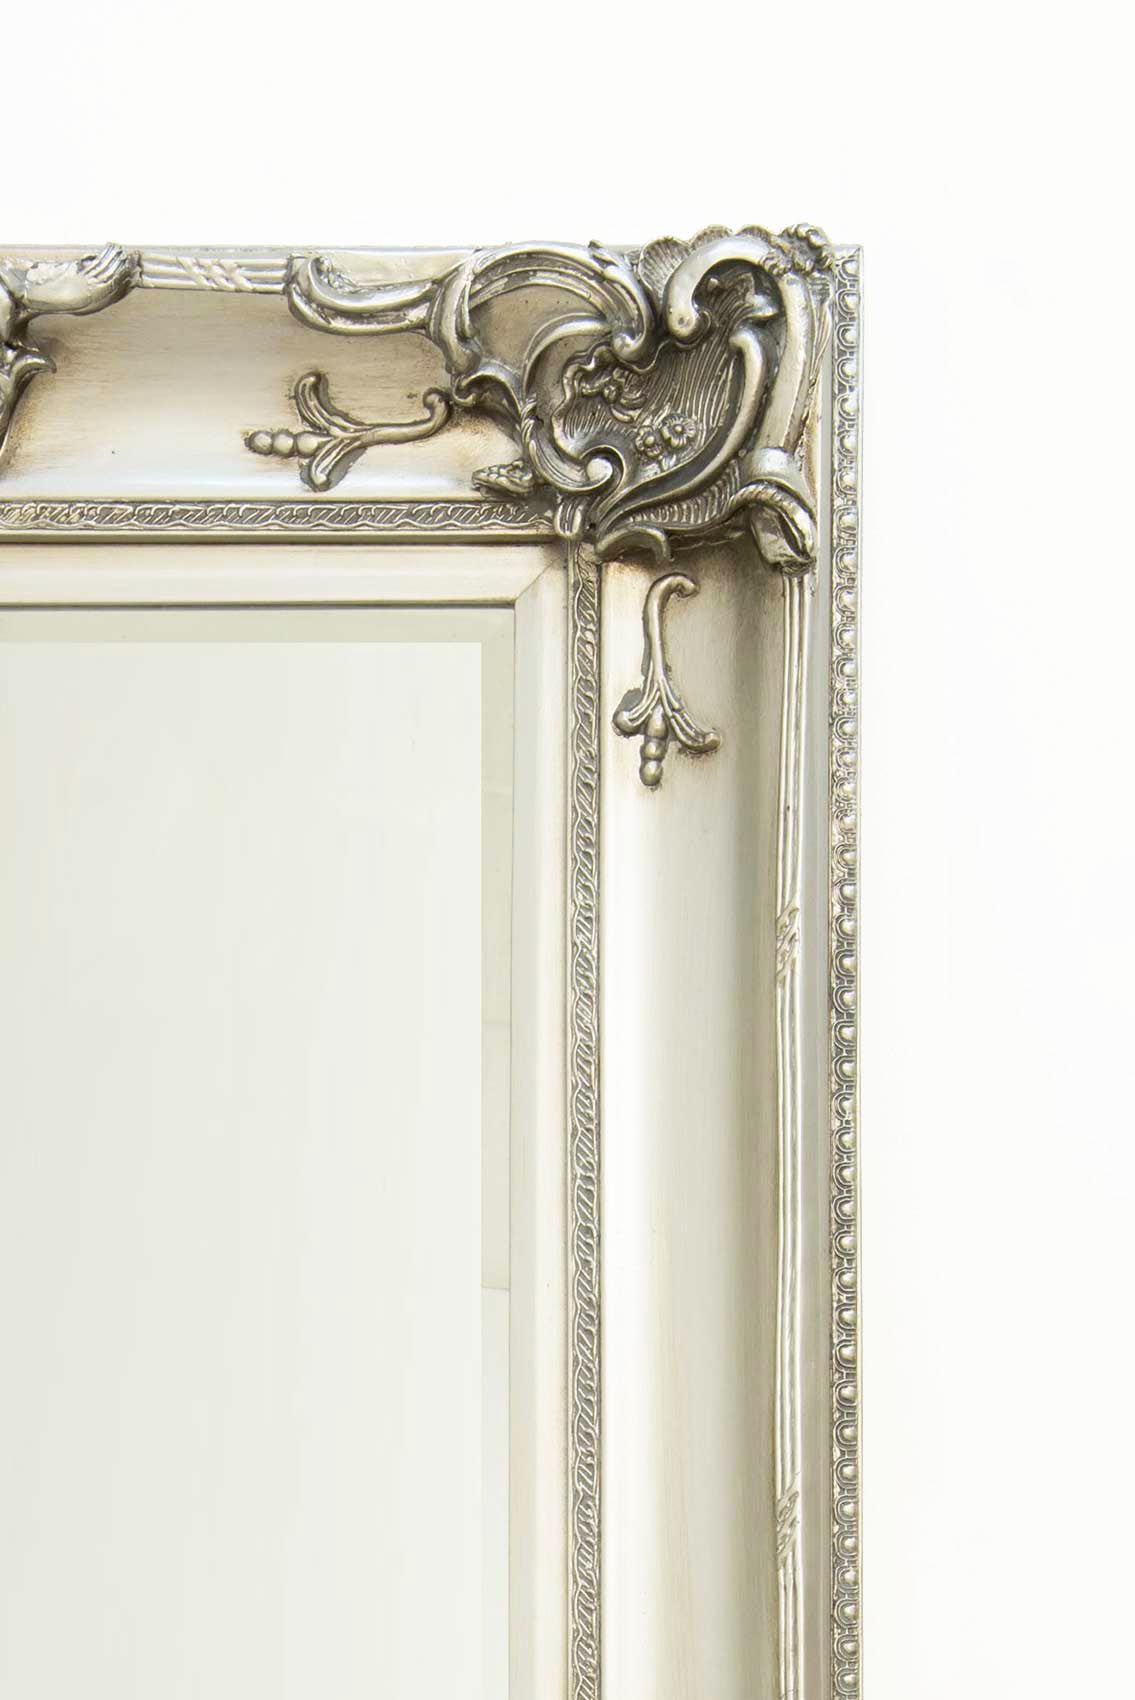 Beautiful Large Silver Decorative Ornate Wall Mirror 6Ft X 3Ft 183 X Regarding Silver Decorative Wall Mirrors (View 13 of 15)